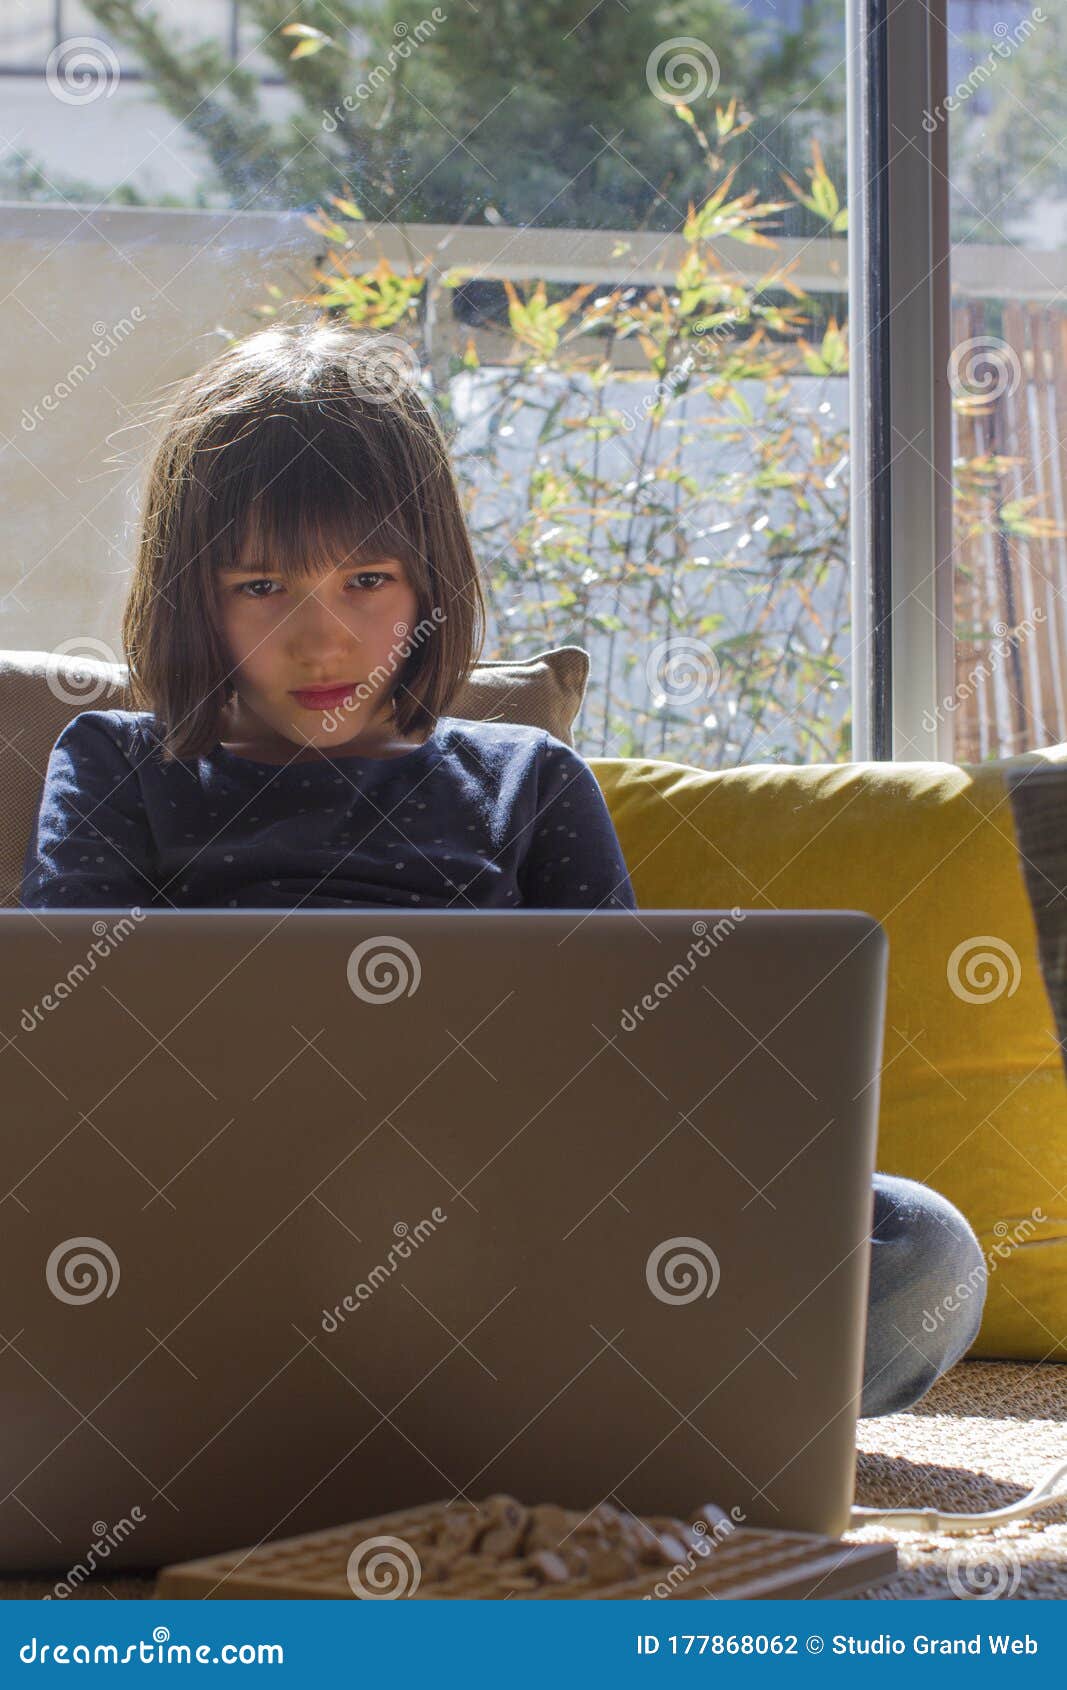 lonely child hypnotized by computer for homeschool learning, screen overdose